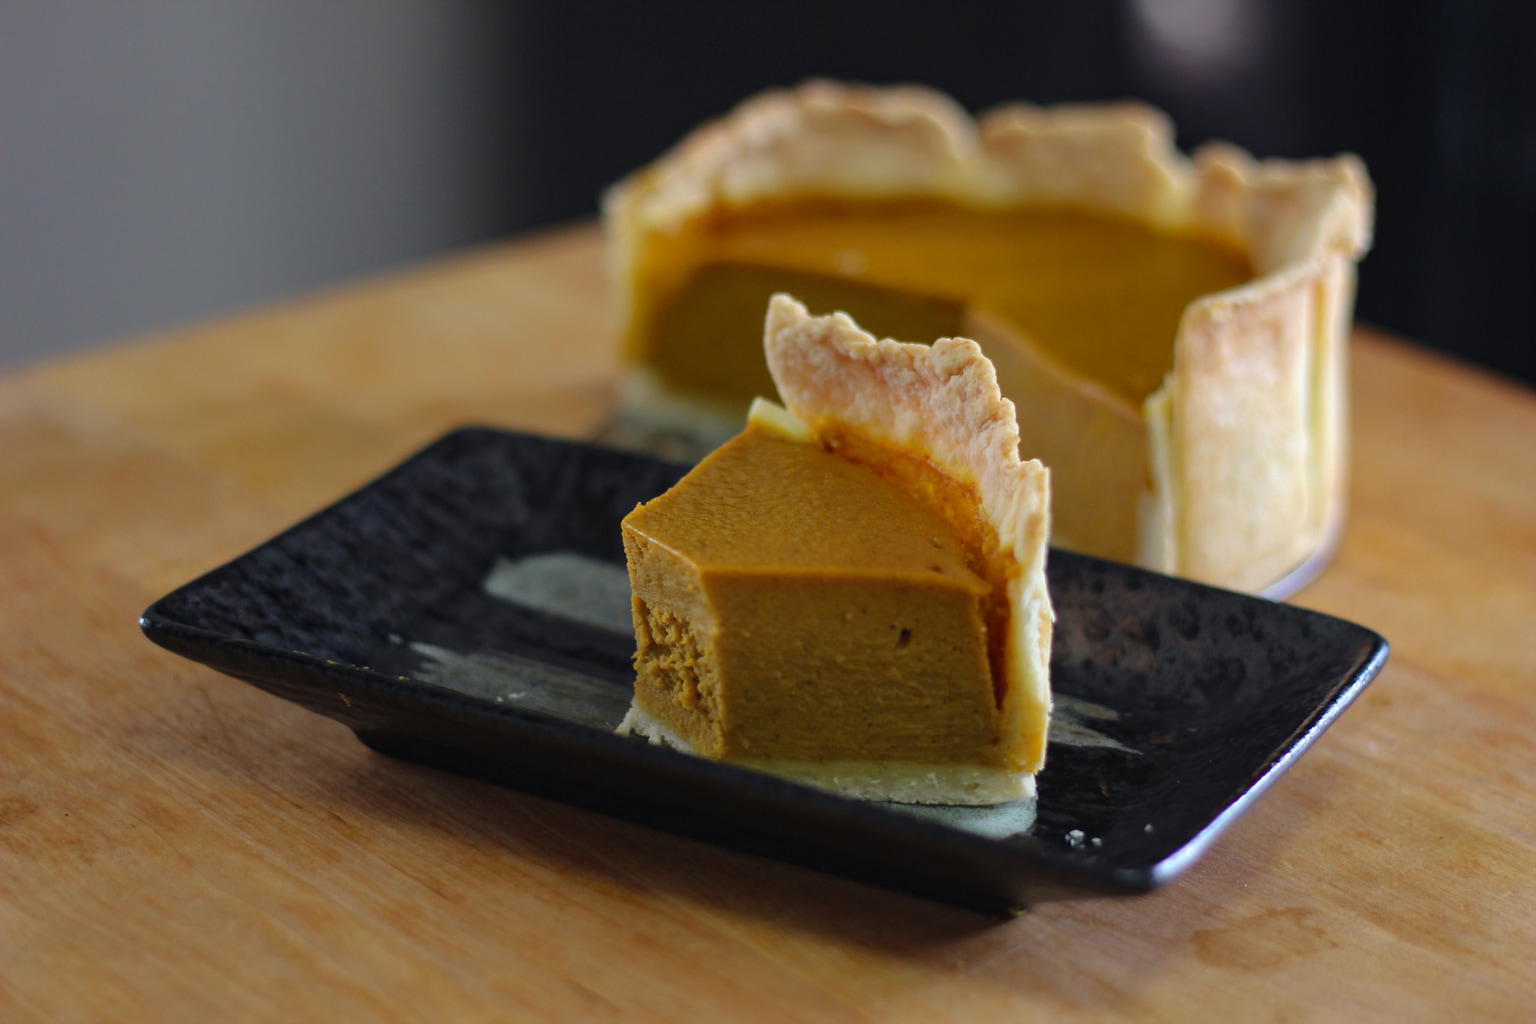 How to Make Homemade Pumpkin Pie in Japan and other Seasonal Autumn Recipes